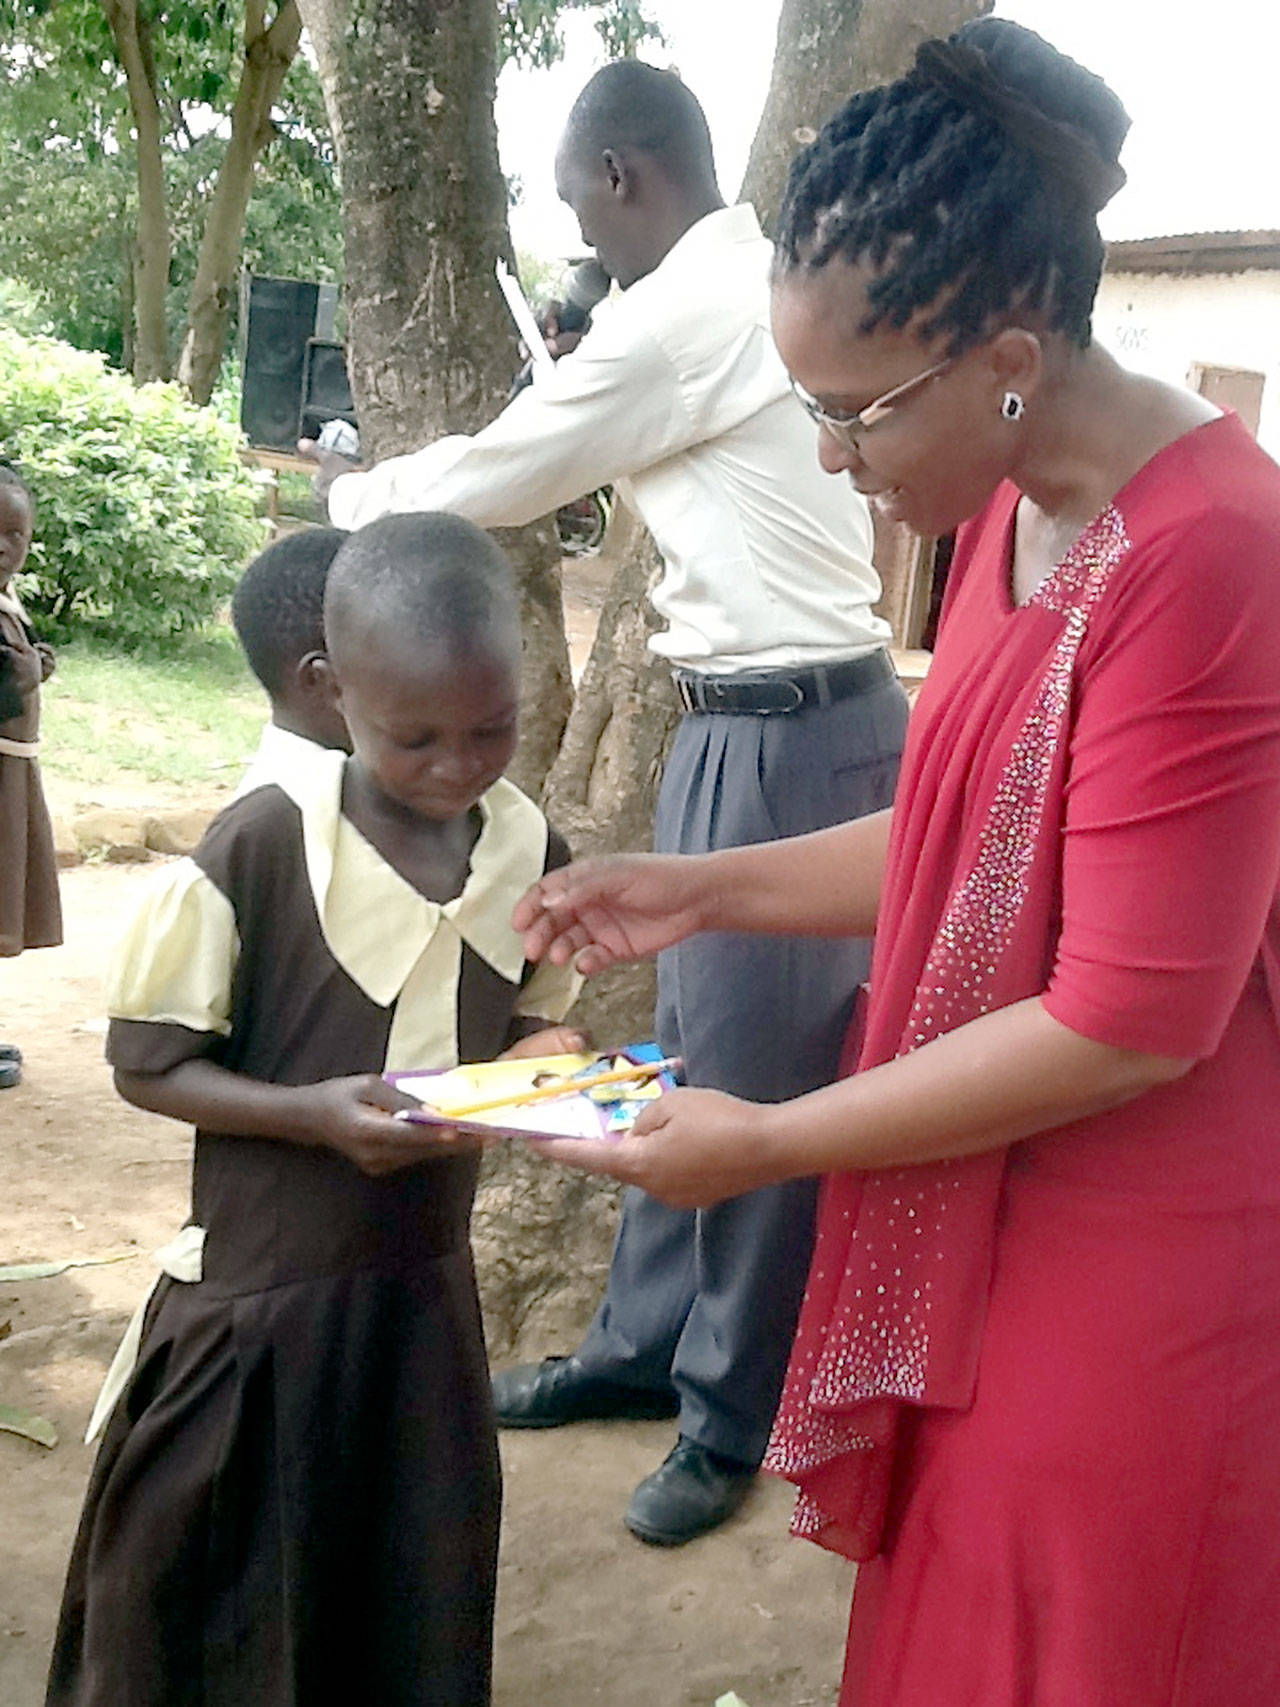 At the Star of Hope Centre in Bungoma, Kenya, Gladwell Sempele Muyelele congratulates a student during a graduation party. (Photo courtesy of Star of Hope Centre)